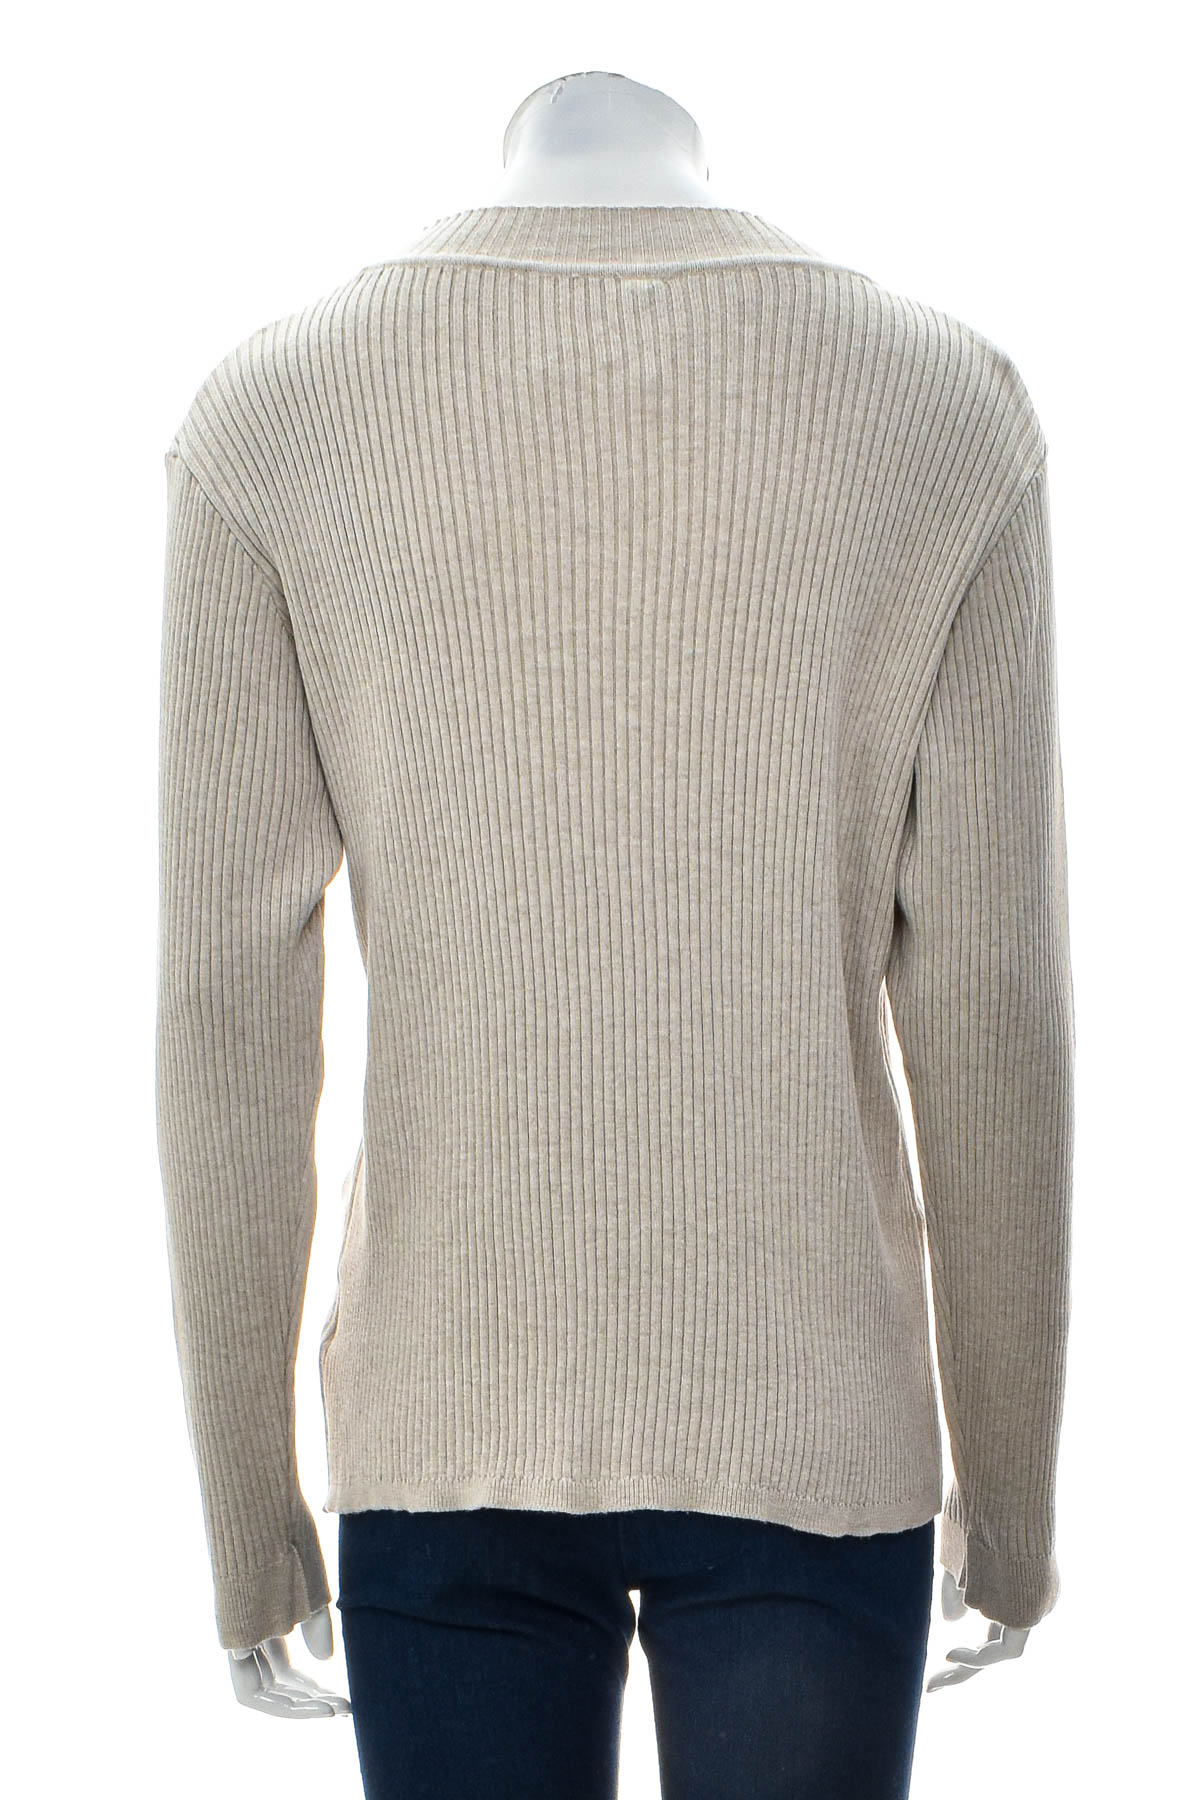 Women's sweater - Ever.me - 1